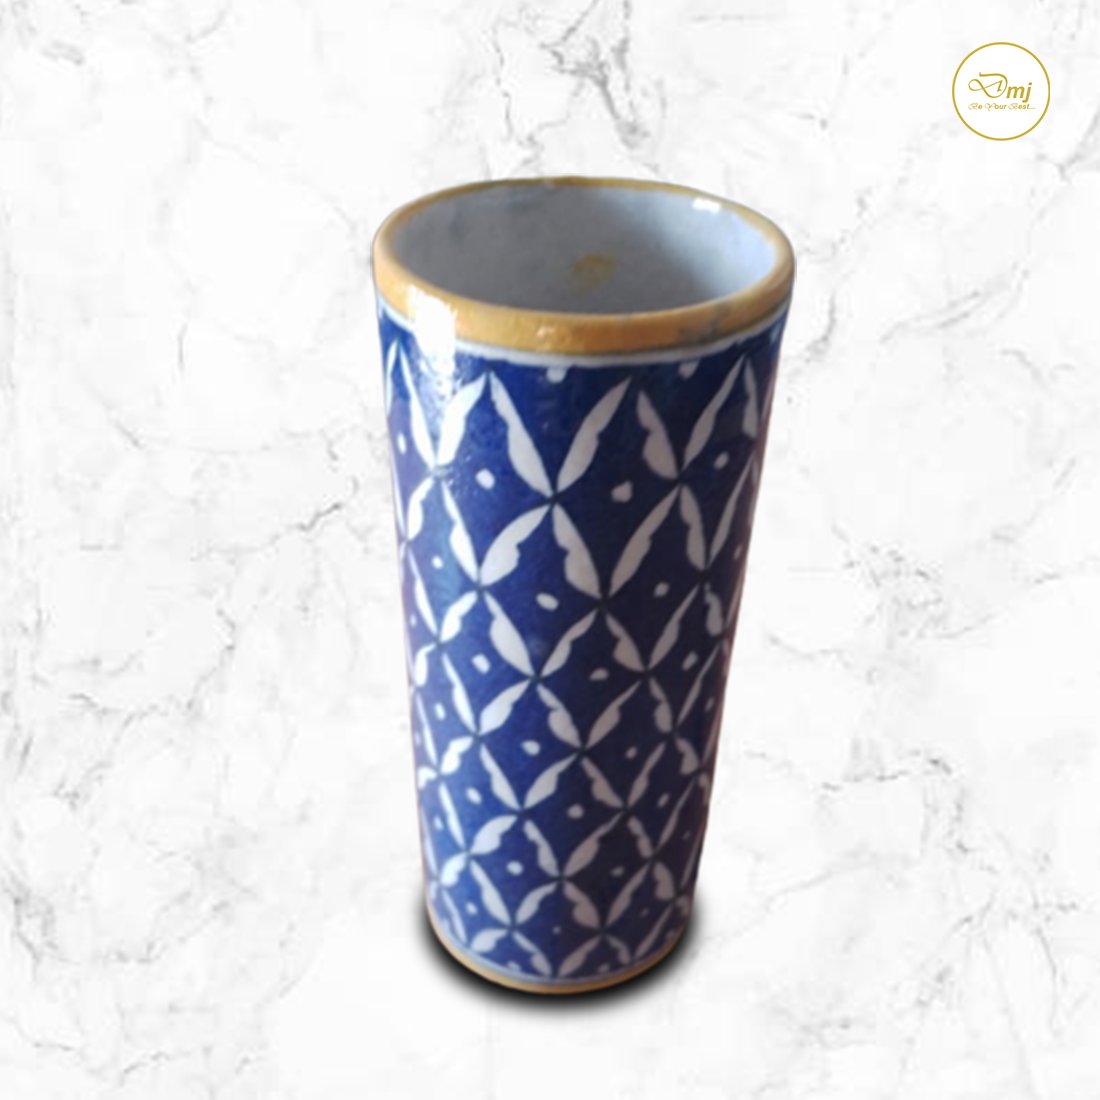 Sip in style with our authentic Mexican Caballito Tequilero, a true work of art, handcrafted with precision and passion. 

#TimelessCraftsmanship #ArtistryInClay #UniqueHomeAccens #CulturalCrafts #HomeAmbiance #VibrantCeramics #IndianCraftsmanship #BeautifulPottery #CeramicArt